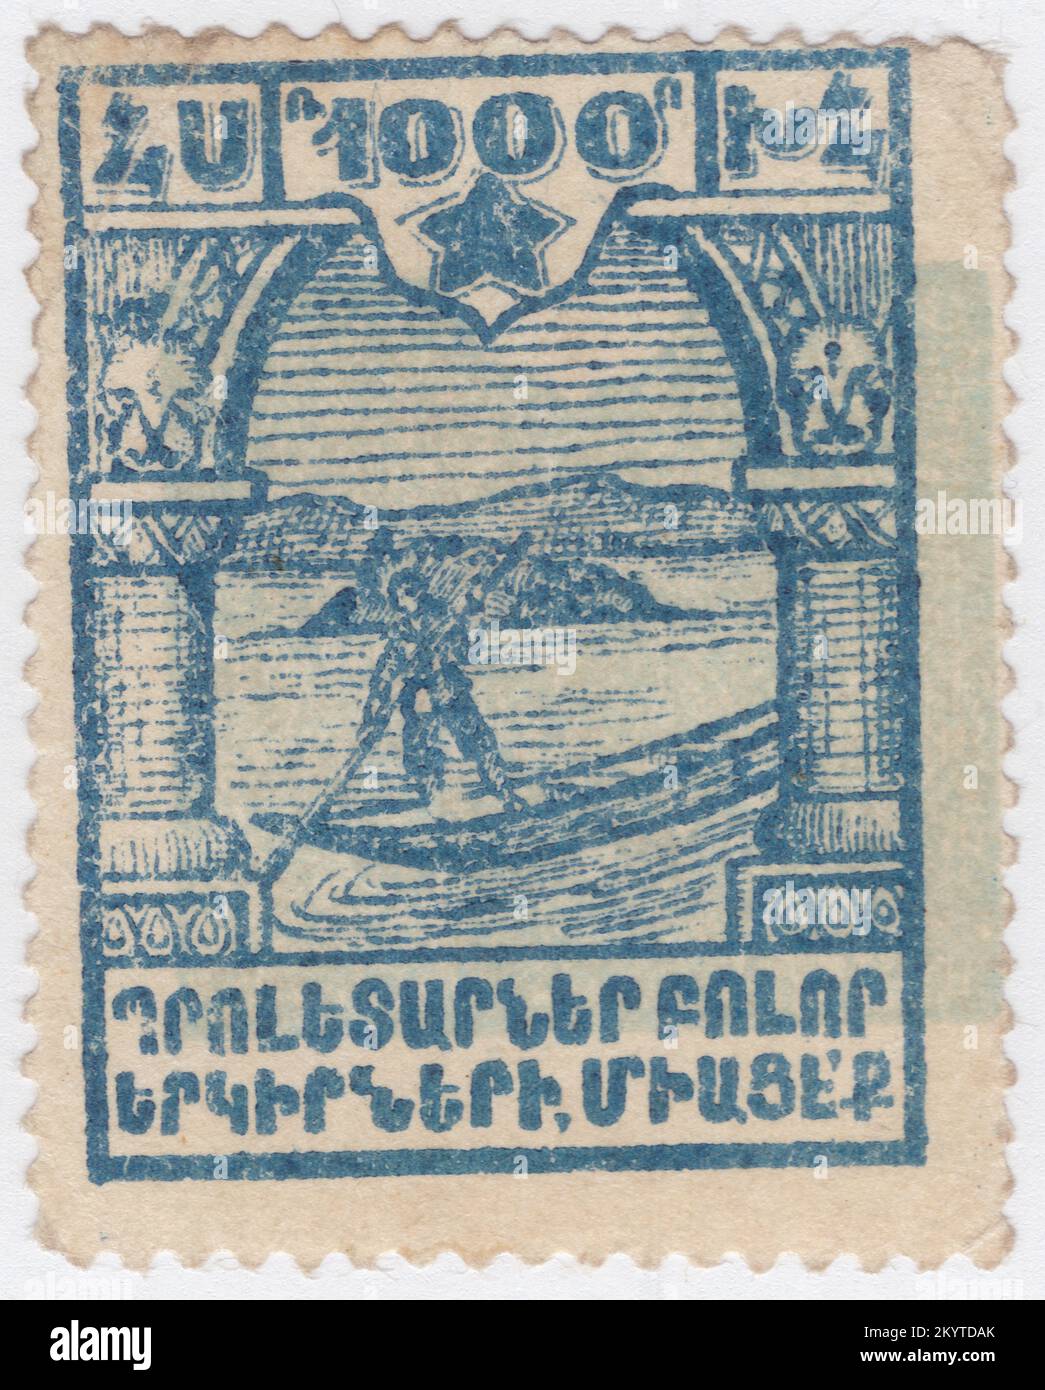 ARMENIA - 1922: An 1000 rubles dull blue and pale blue postage stamp depicting Peasant on Boat. Officially the Republic of Armenia, is a landlocked country in the Armenian Highlands of Western Asia. It is a part of the Caucasus region; and is bordered by Turkey to the west, Georgia to the north, the Lachin corridor (under a Russian occupation force) and Azerbaijan to the east, and Iran and the Azerbaijani exclave of Nakhchivan to the south. Yerevan is the capital, largest city and the financial center. Armenia is a unitary, multi-party, democratic nation-state with an ancient cultural heritage Stock Photo